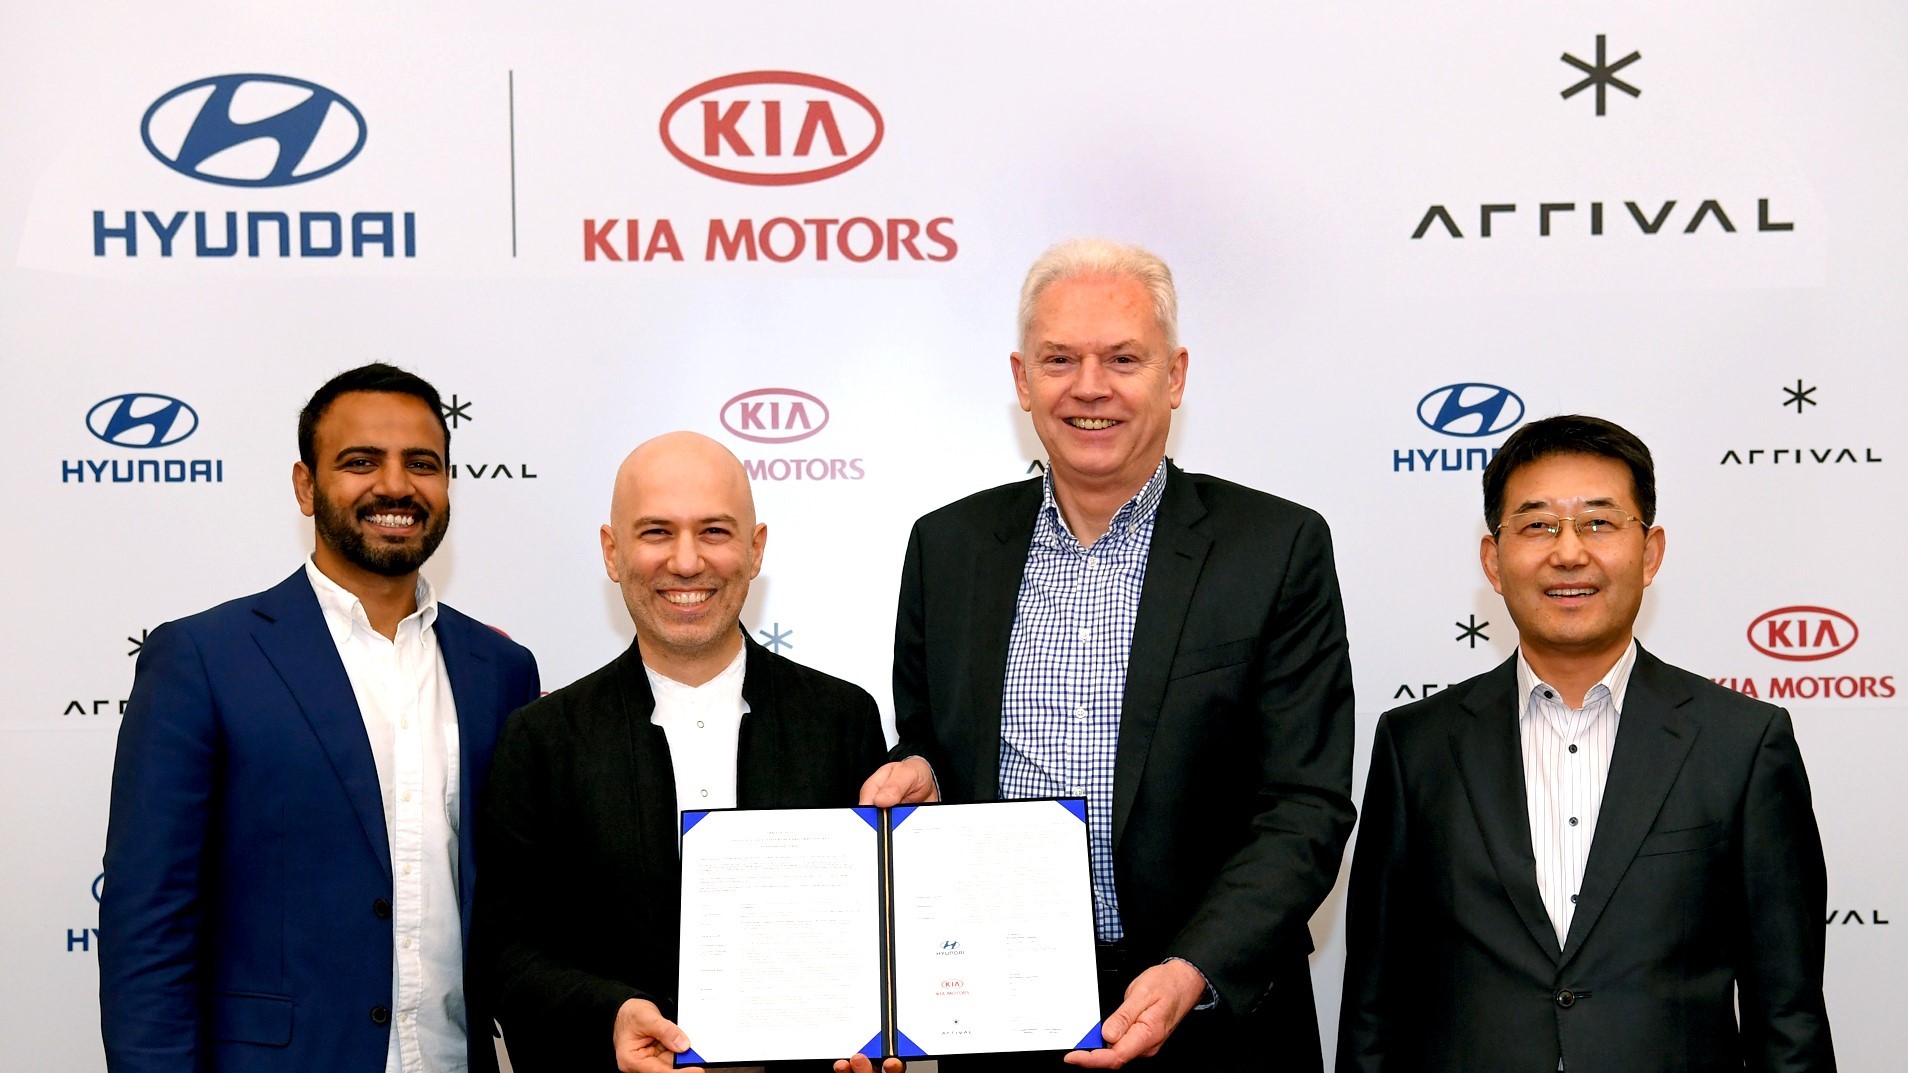 Hyundai and Kia Make Strategic Investment in Arrival signing ceremony